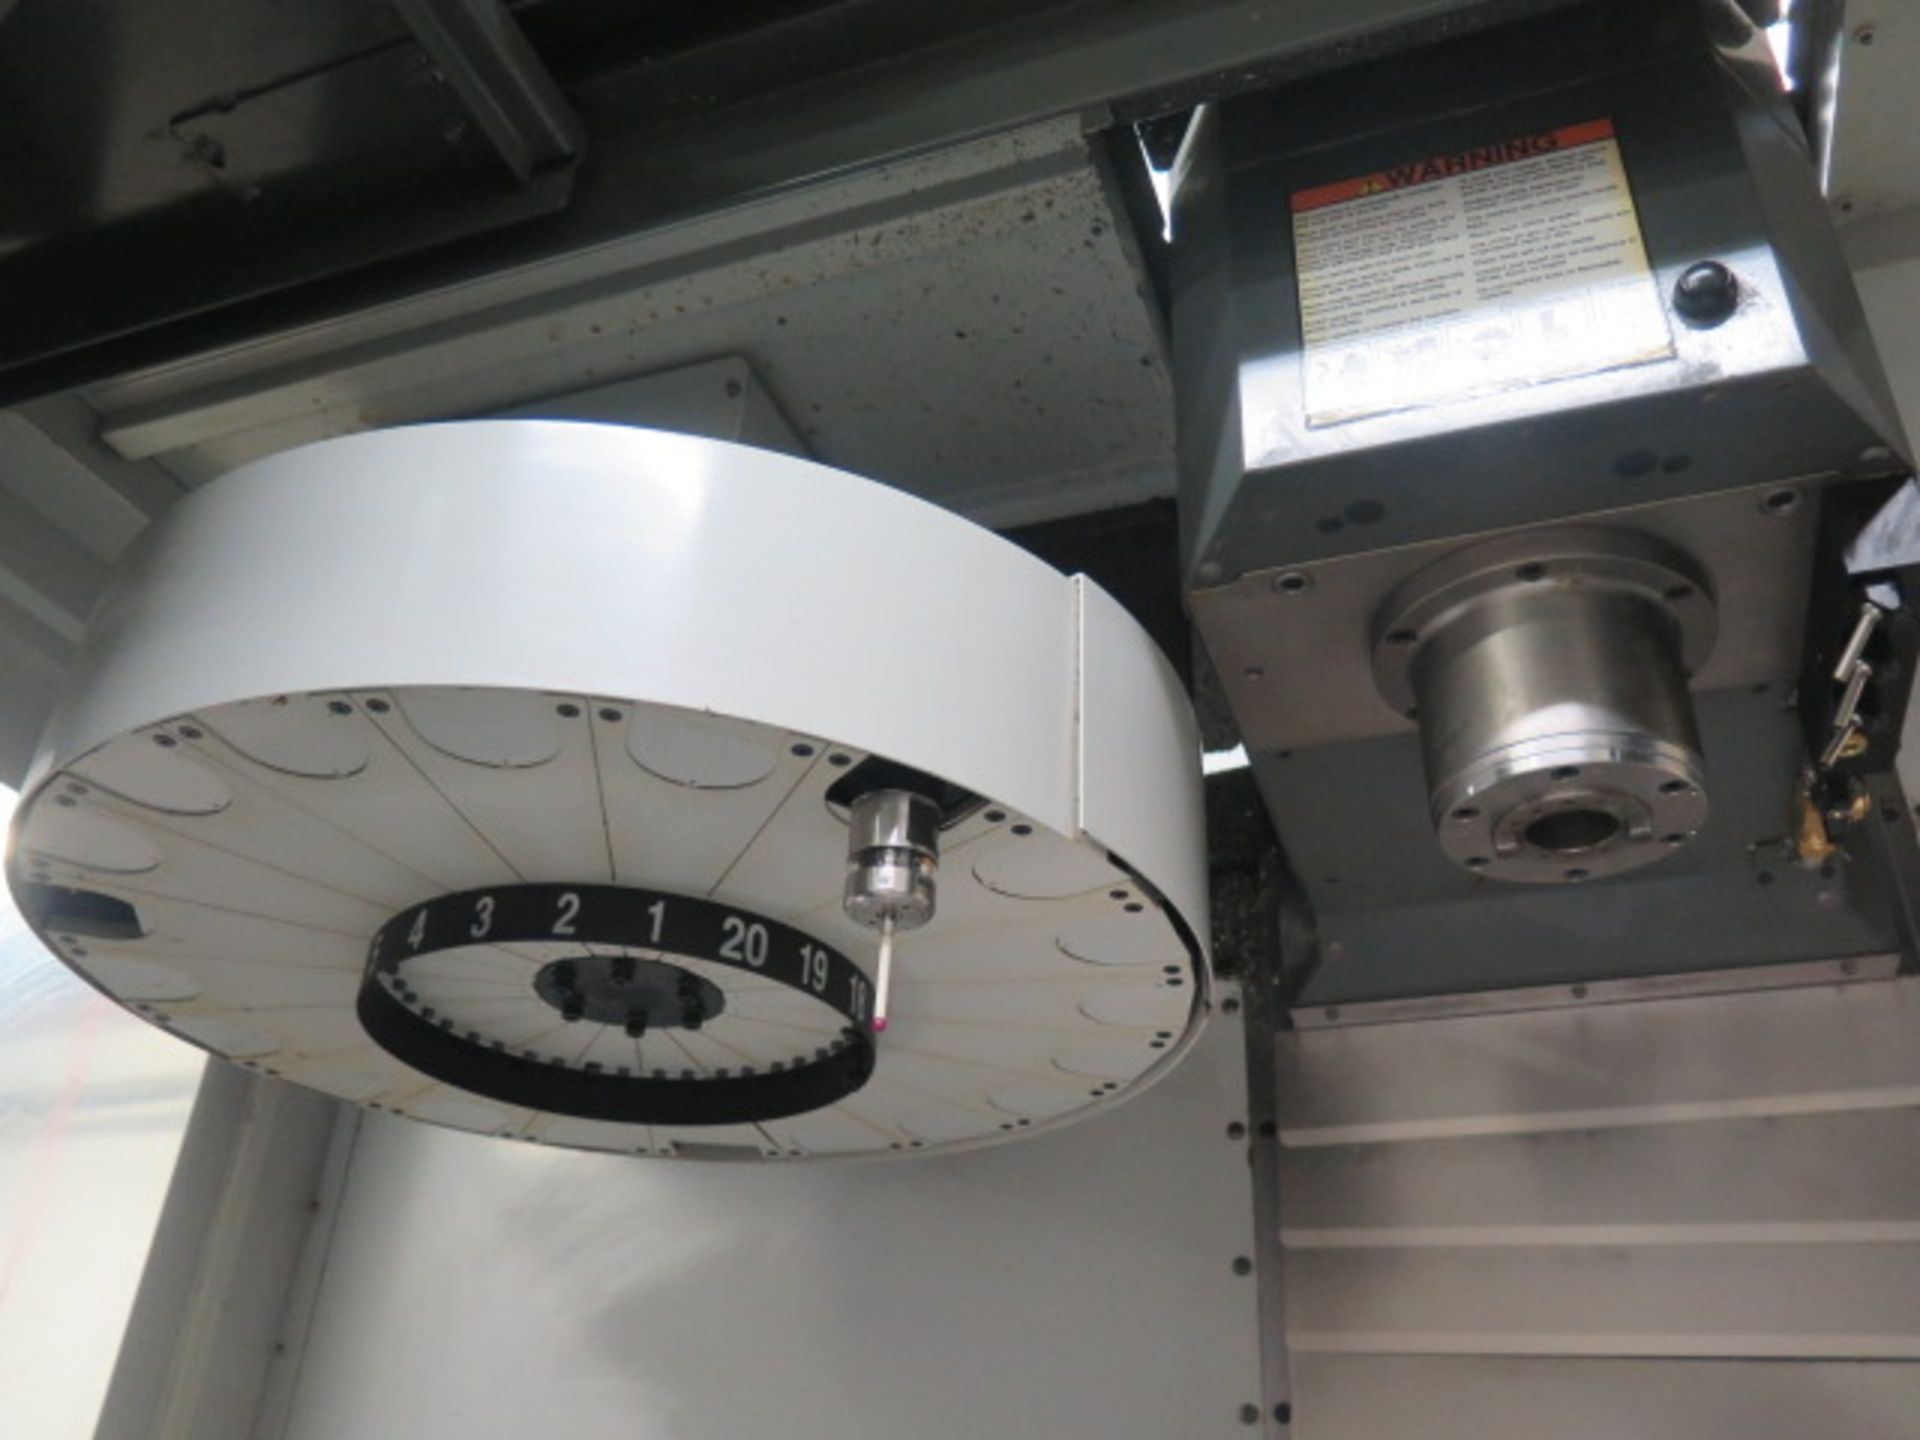 2013 Haas VF-2 CNC Vertical Machining Center s/n 1107672 w/ Haas Controls, Ver M18.16B Software, - Image 5 of 15